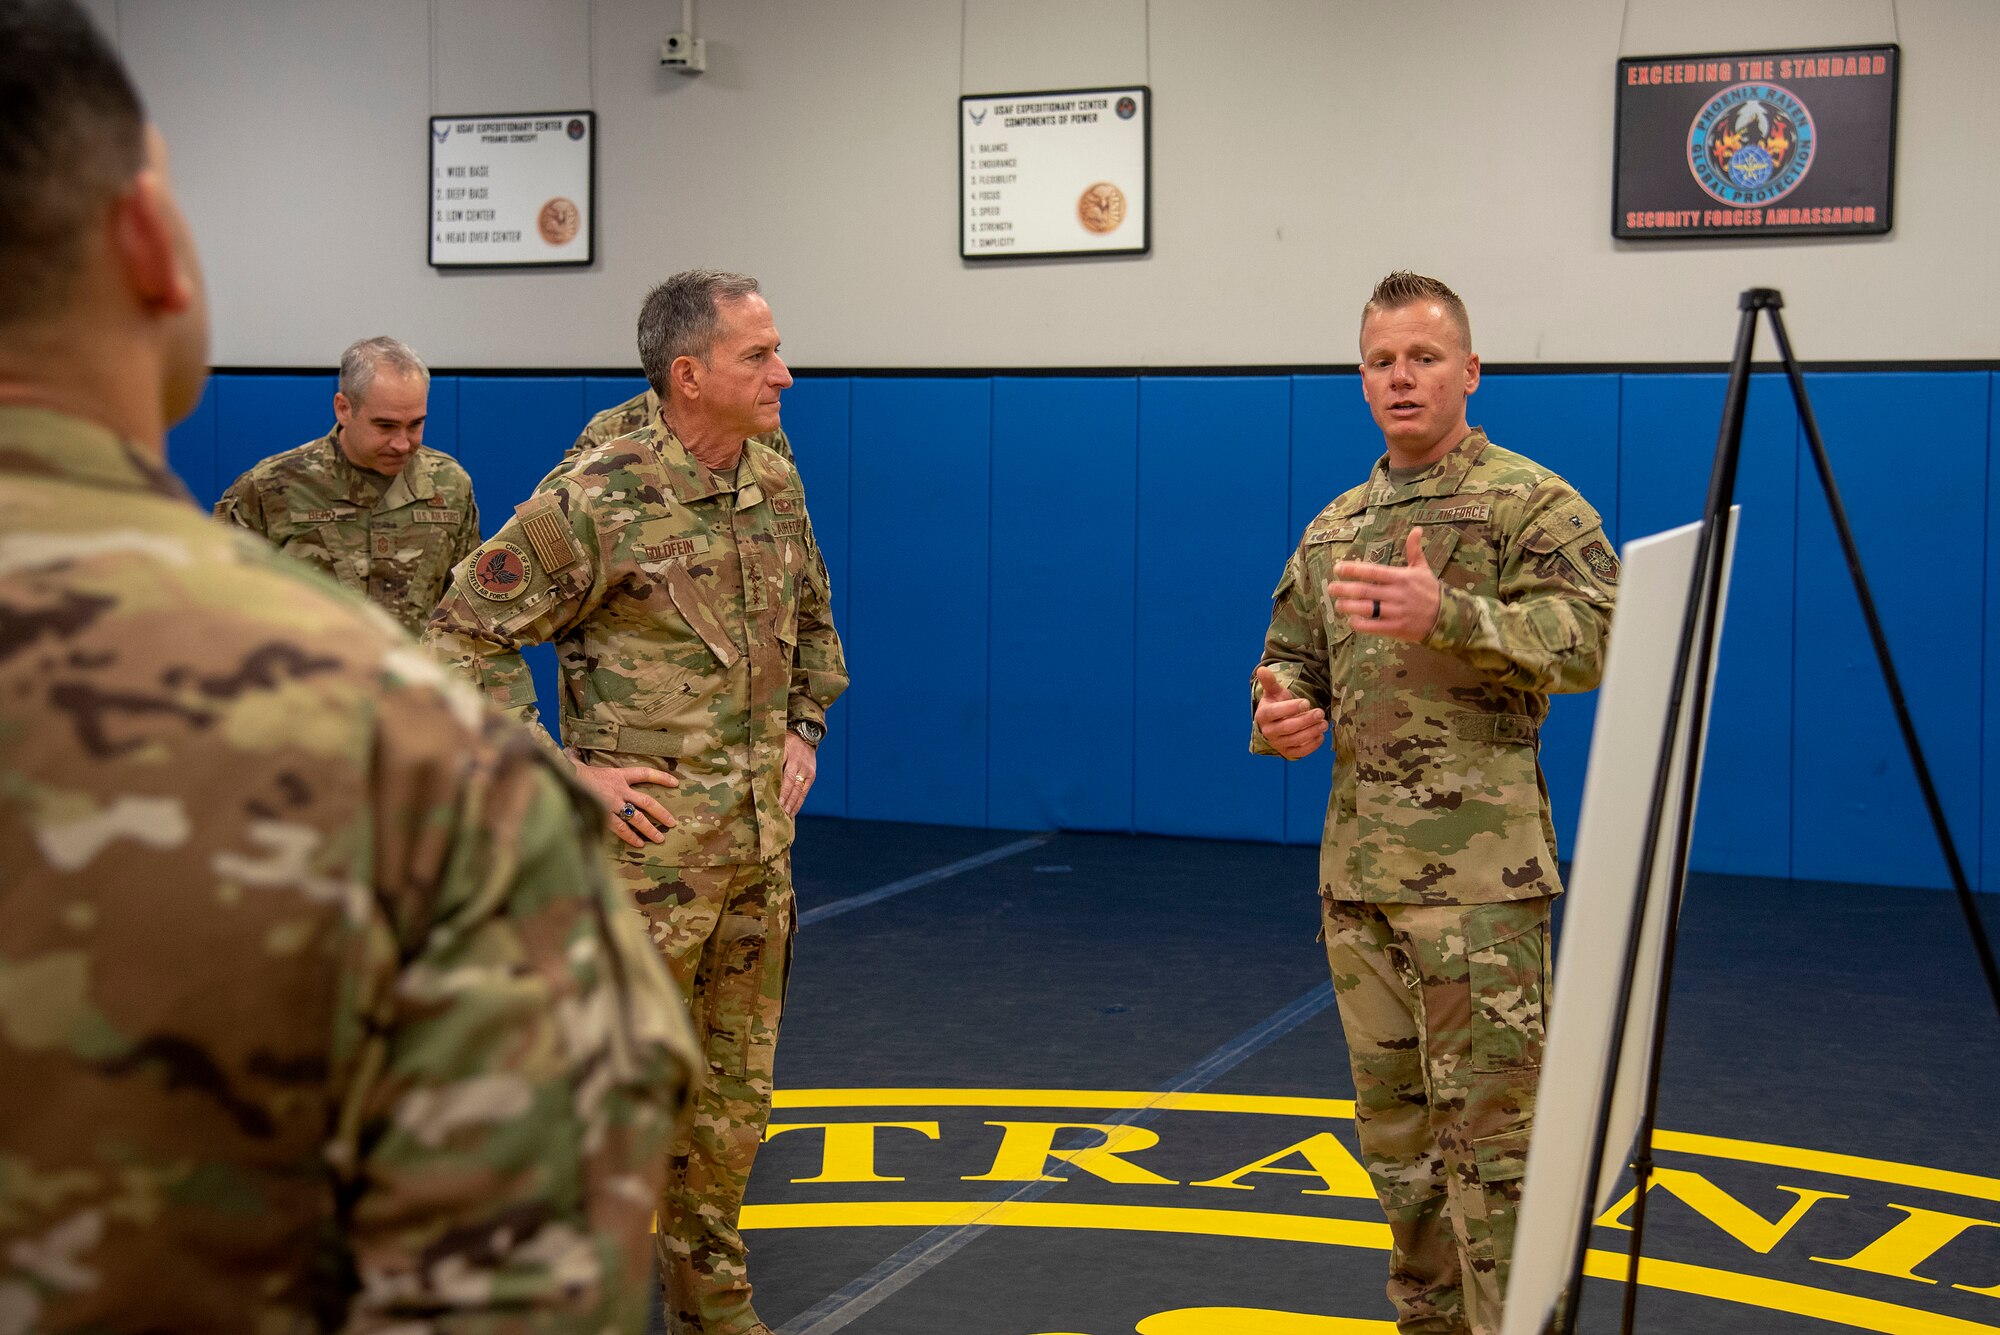 U.S. Air Force Tech. Sgt. Joshua Lipp, Phoenix Raven Qualification Course NCO in charge assigned to the 421st Combat Training Squadron, shares course history with Air Force Chief of Staff Gen. David L. Goldfein and Chief Master Sgt. of the Air Force Kaleth O. Wright during their visit to the U.S. Air Force Expeditionary Center as part of 2019 Fall Phoenix Rally, Oct. 9, 2019, at Joint Base McGuire-Dix-Lakehurst, New Jersey. Fall Phoenix Rally is a three-day summit focused on understanding leadership roles in emerging issues with Air Mobility Command, bringing together leadership and spouses from throughout the command